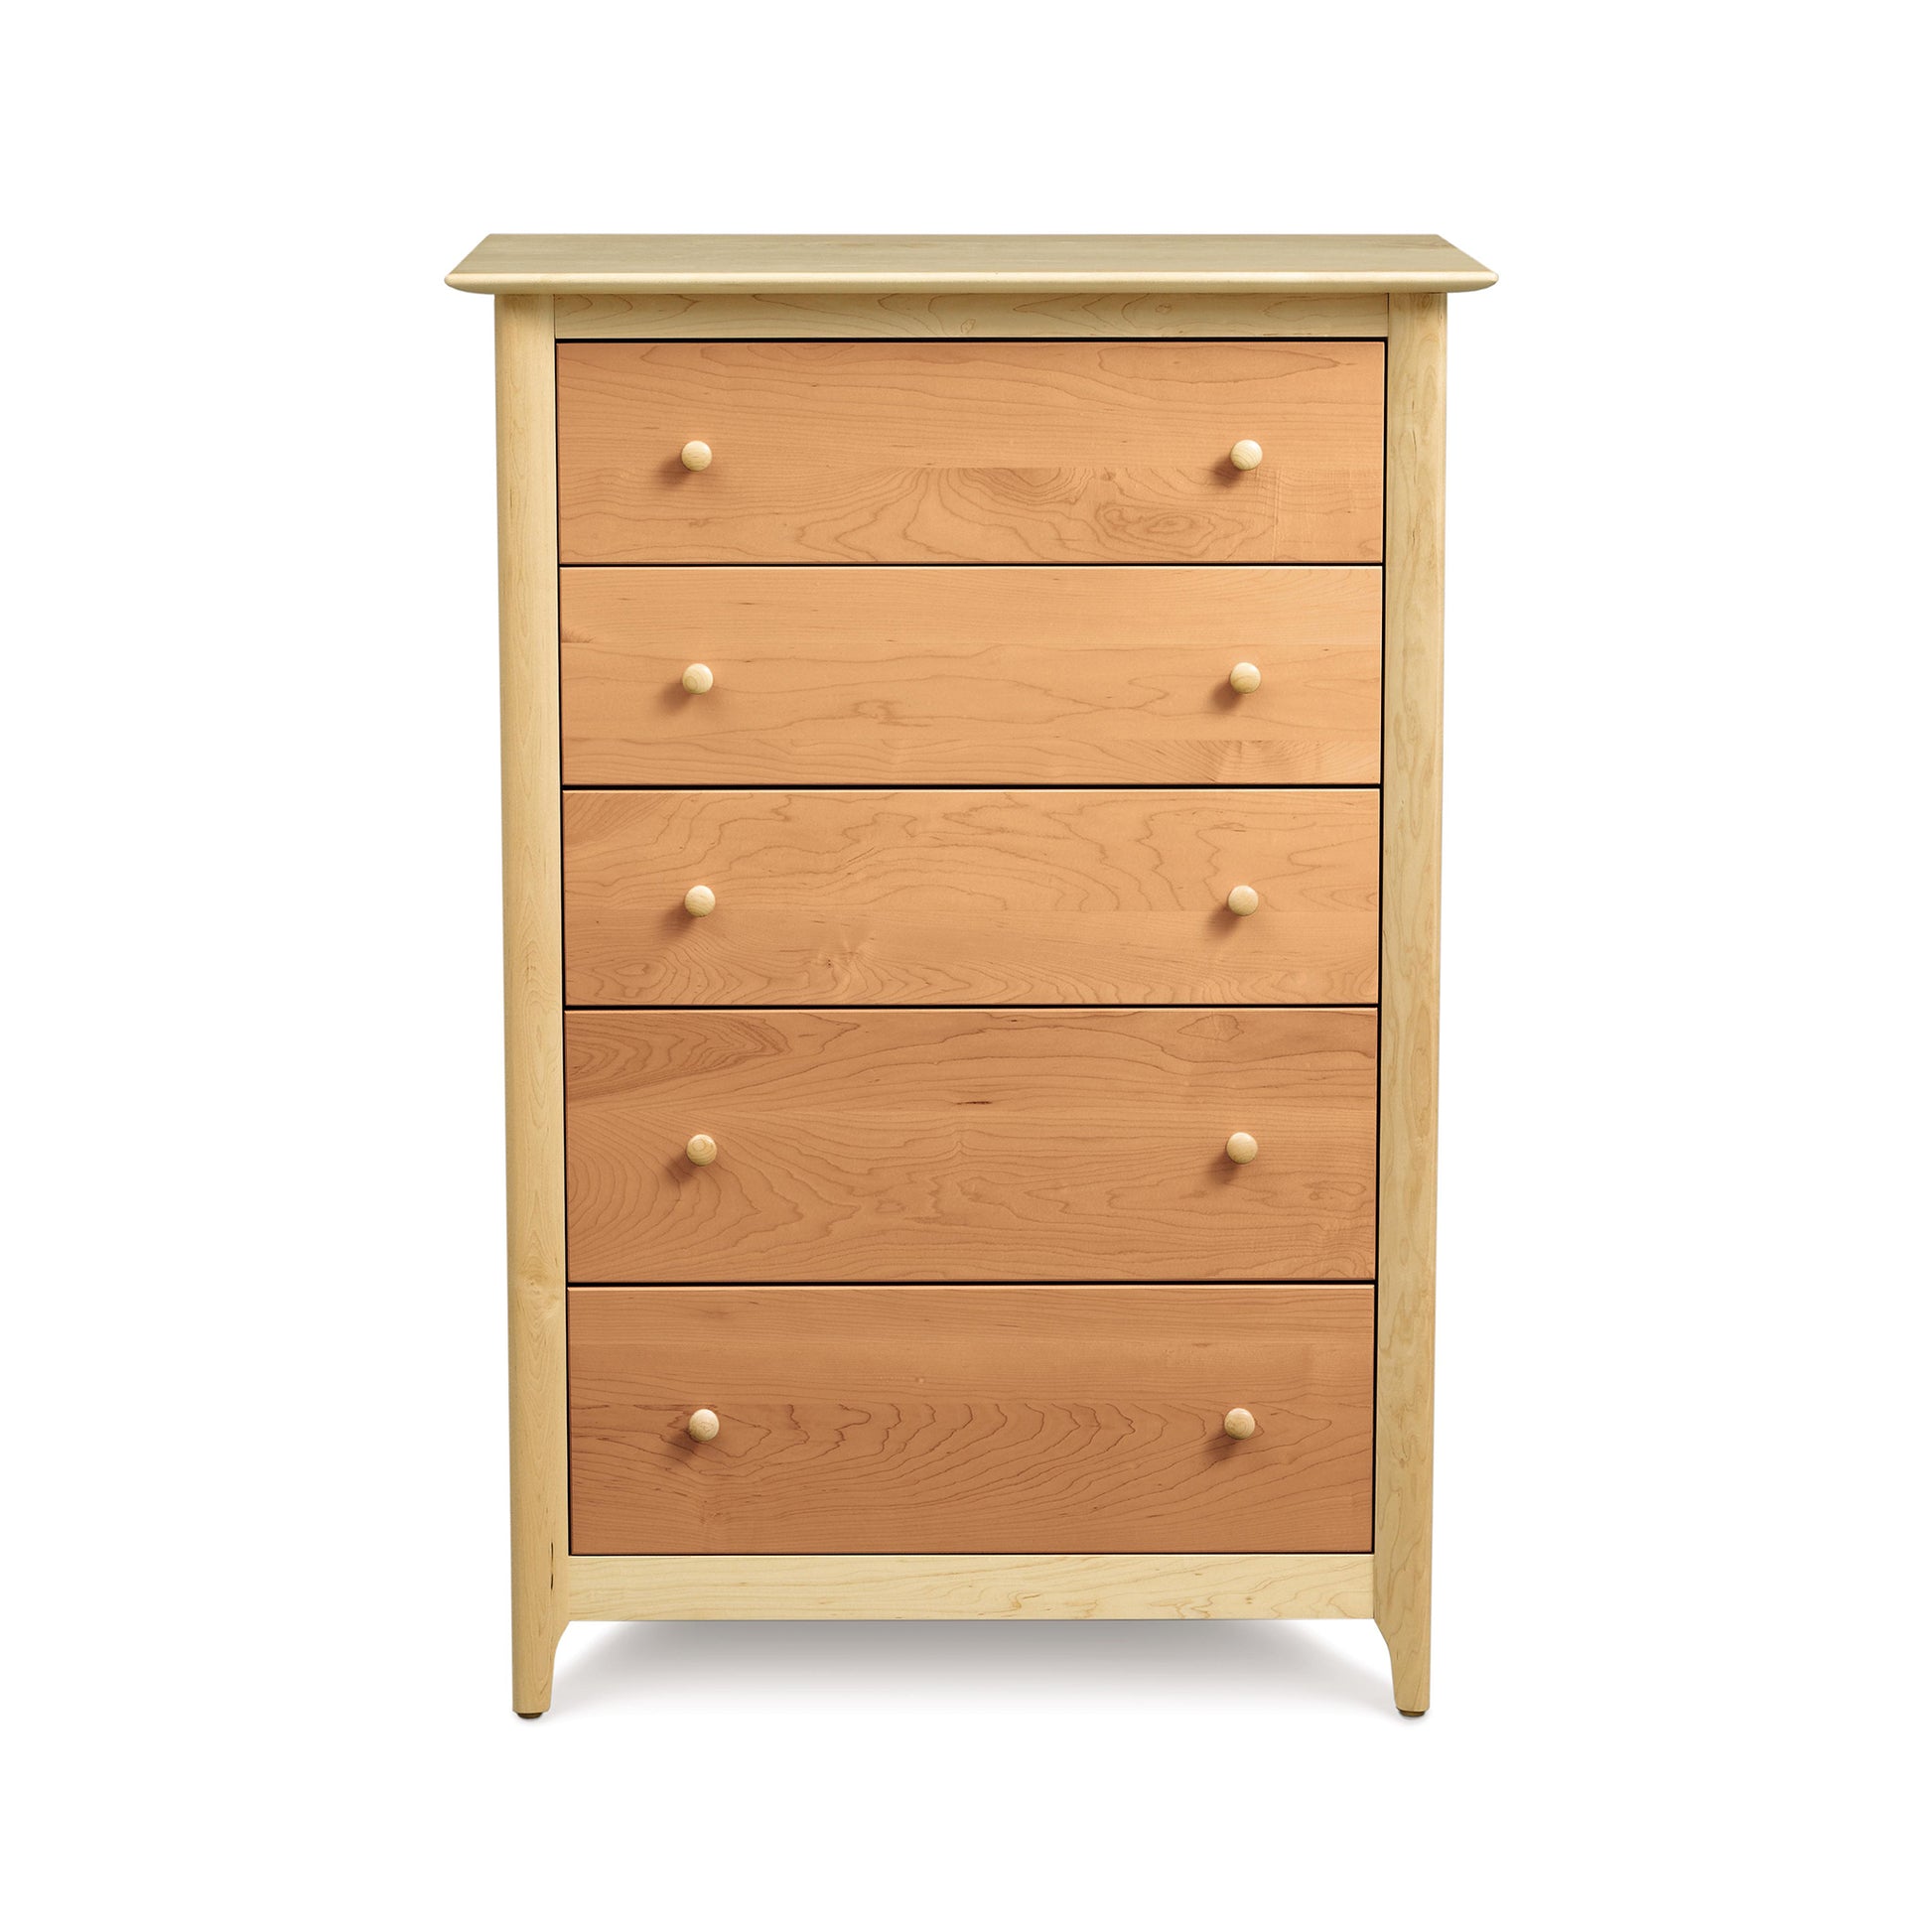 A handmade, eco-friendly Sarah 5-Drawer Chest in cherry wood by Copeland Furniture with round knobs, isolated on a white background.